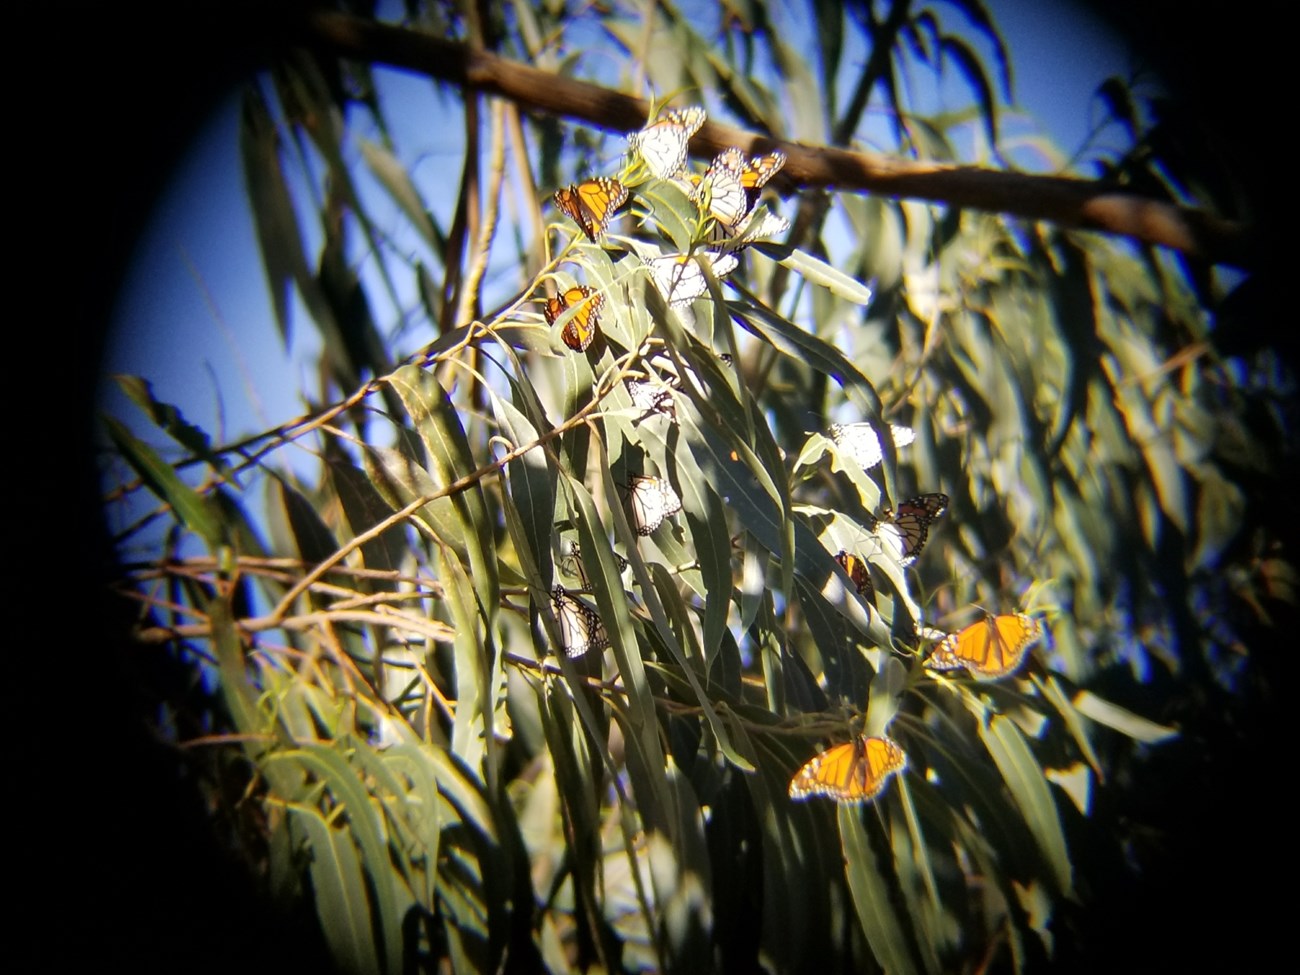 Veiw through a scope of several monarch butterflies on eucalyptus leaves